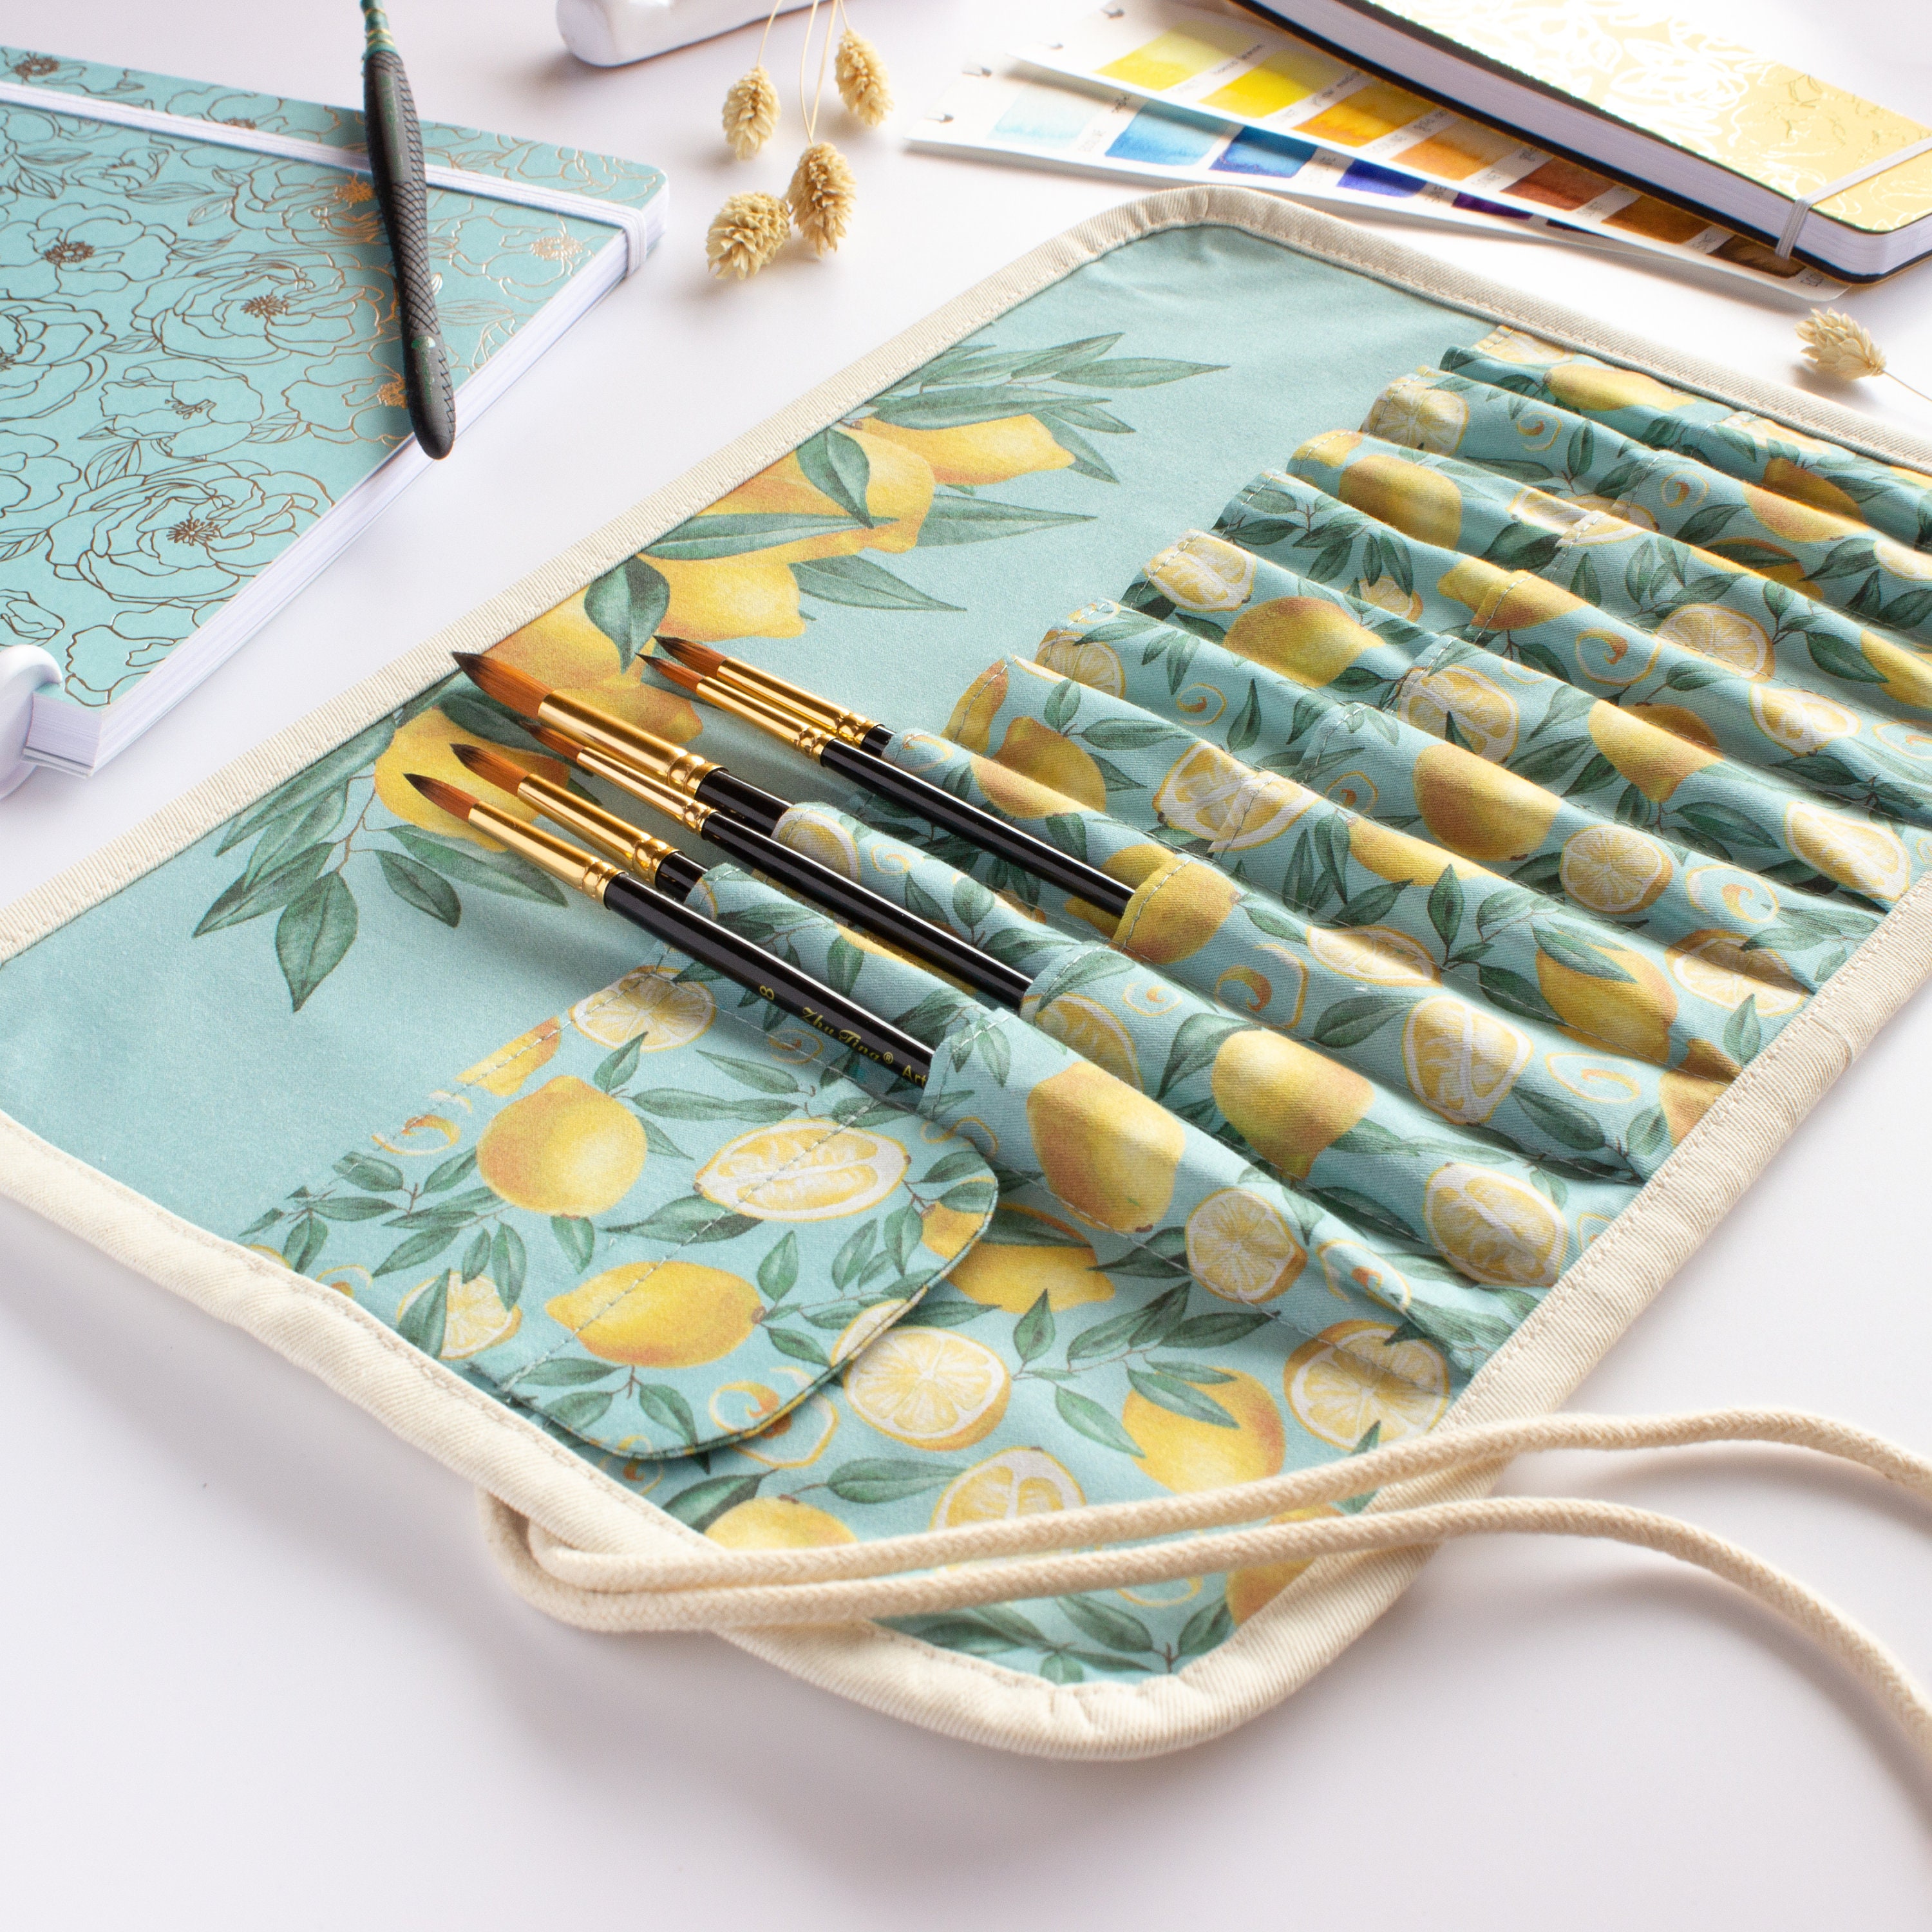 Watercolor Brush Case, Roll-up Holder for Art and Handicraft Tools, Travel  Organizer 